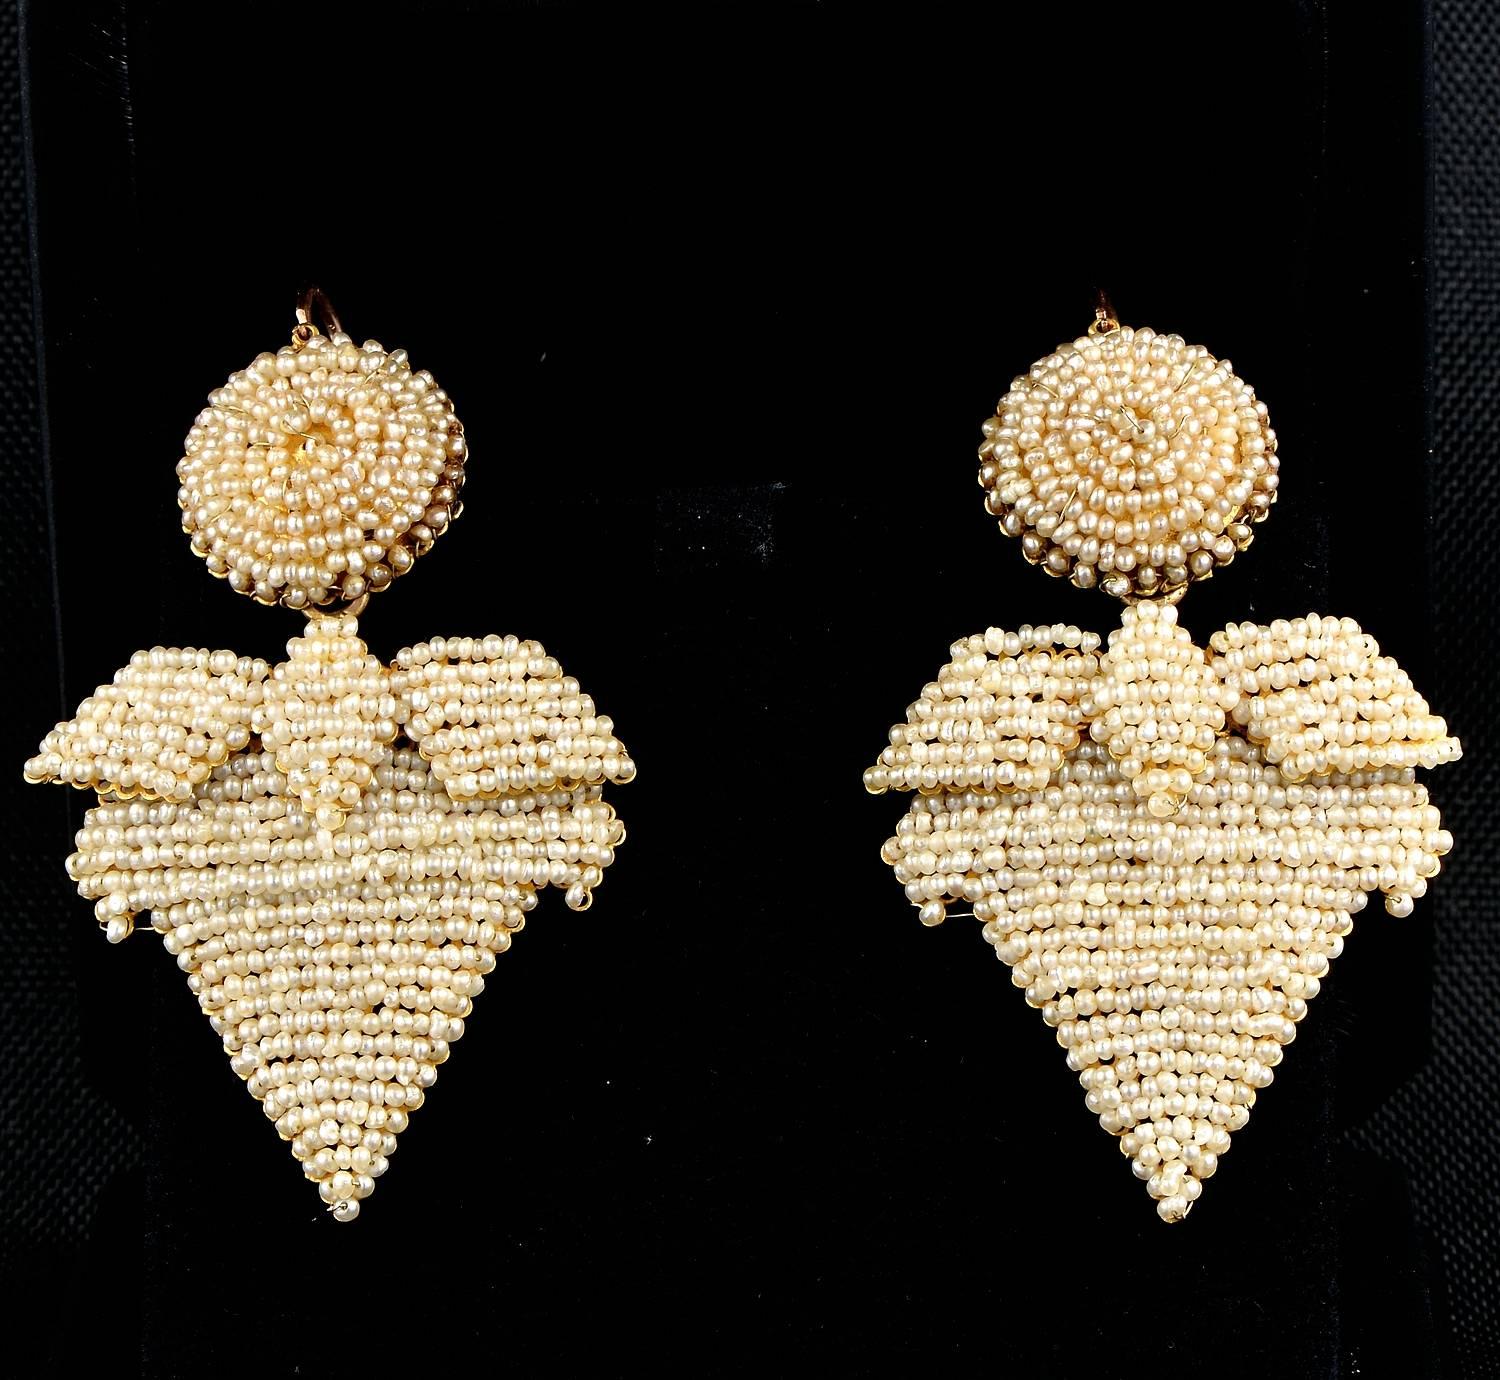 Museum quality
Rare Georgian period bridal earrings hand crafted of solid 22KT gold, amazing back work of gold bearing hallmarks N 6 standing for 1700 Naples southern Italy origin
Made as night and day with a top round shape from which is suspended